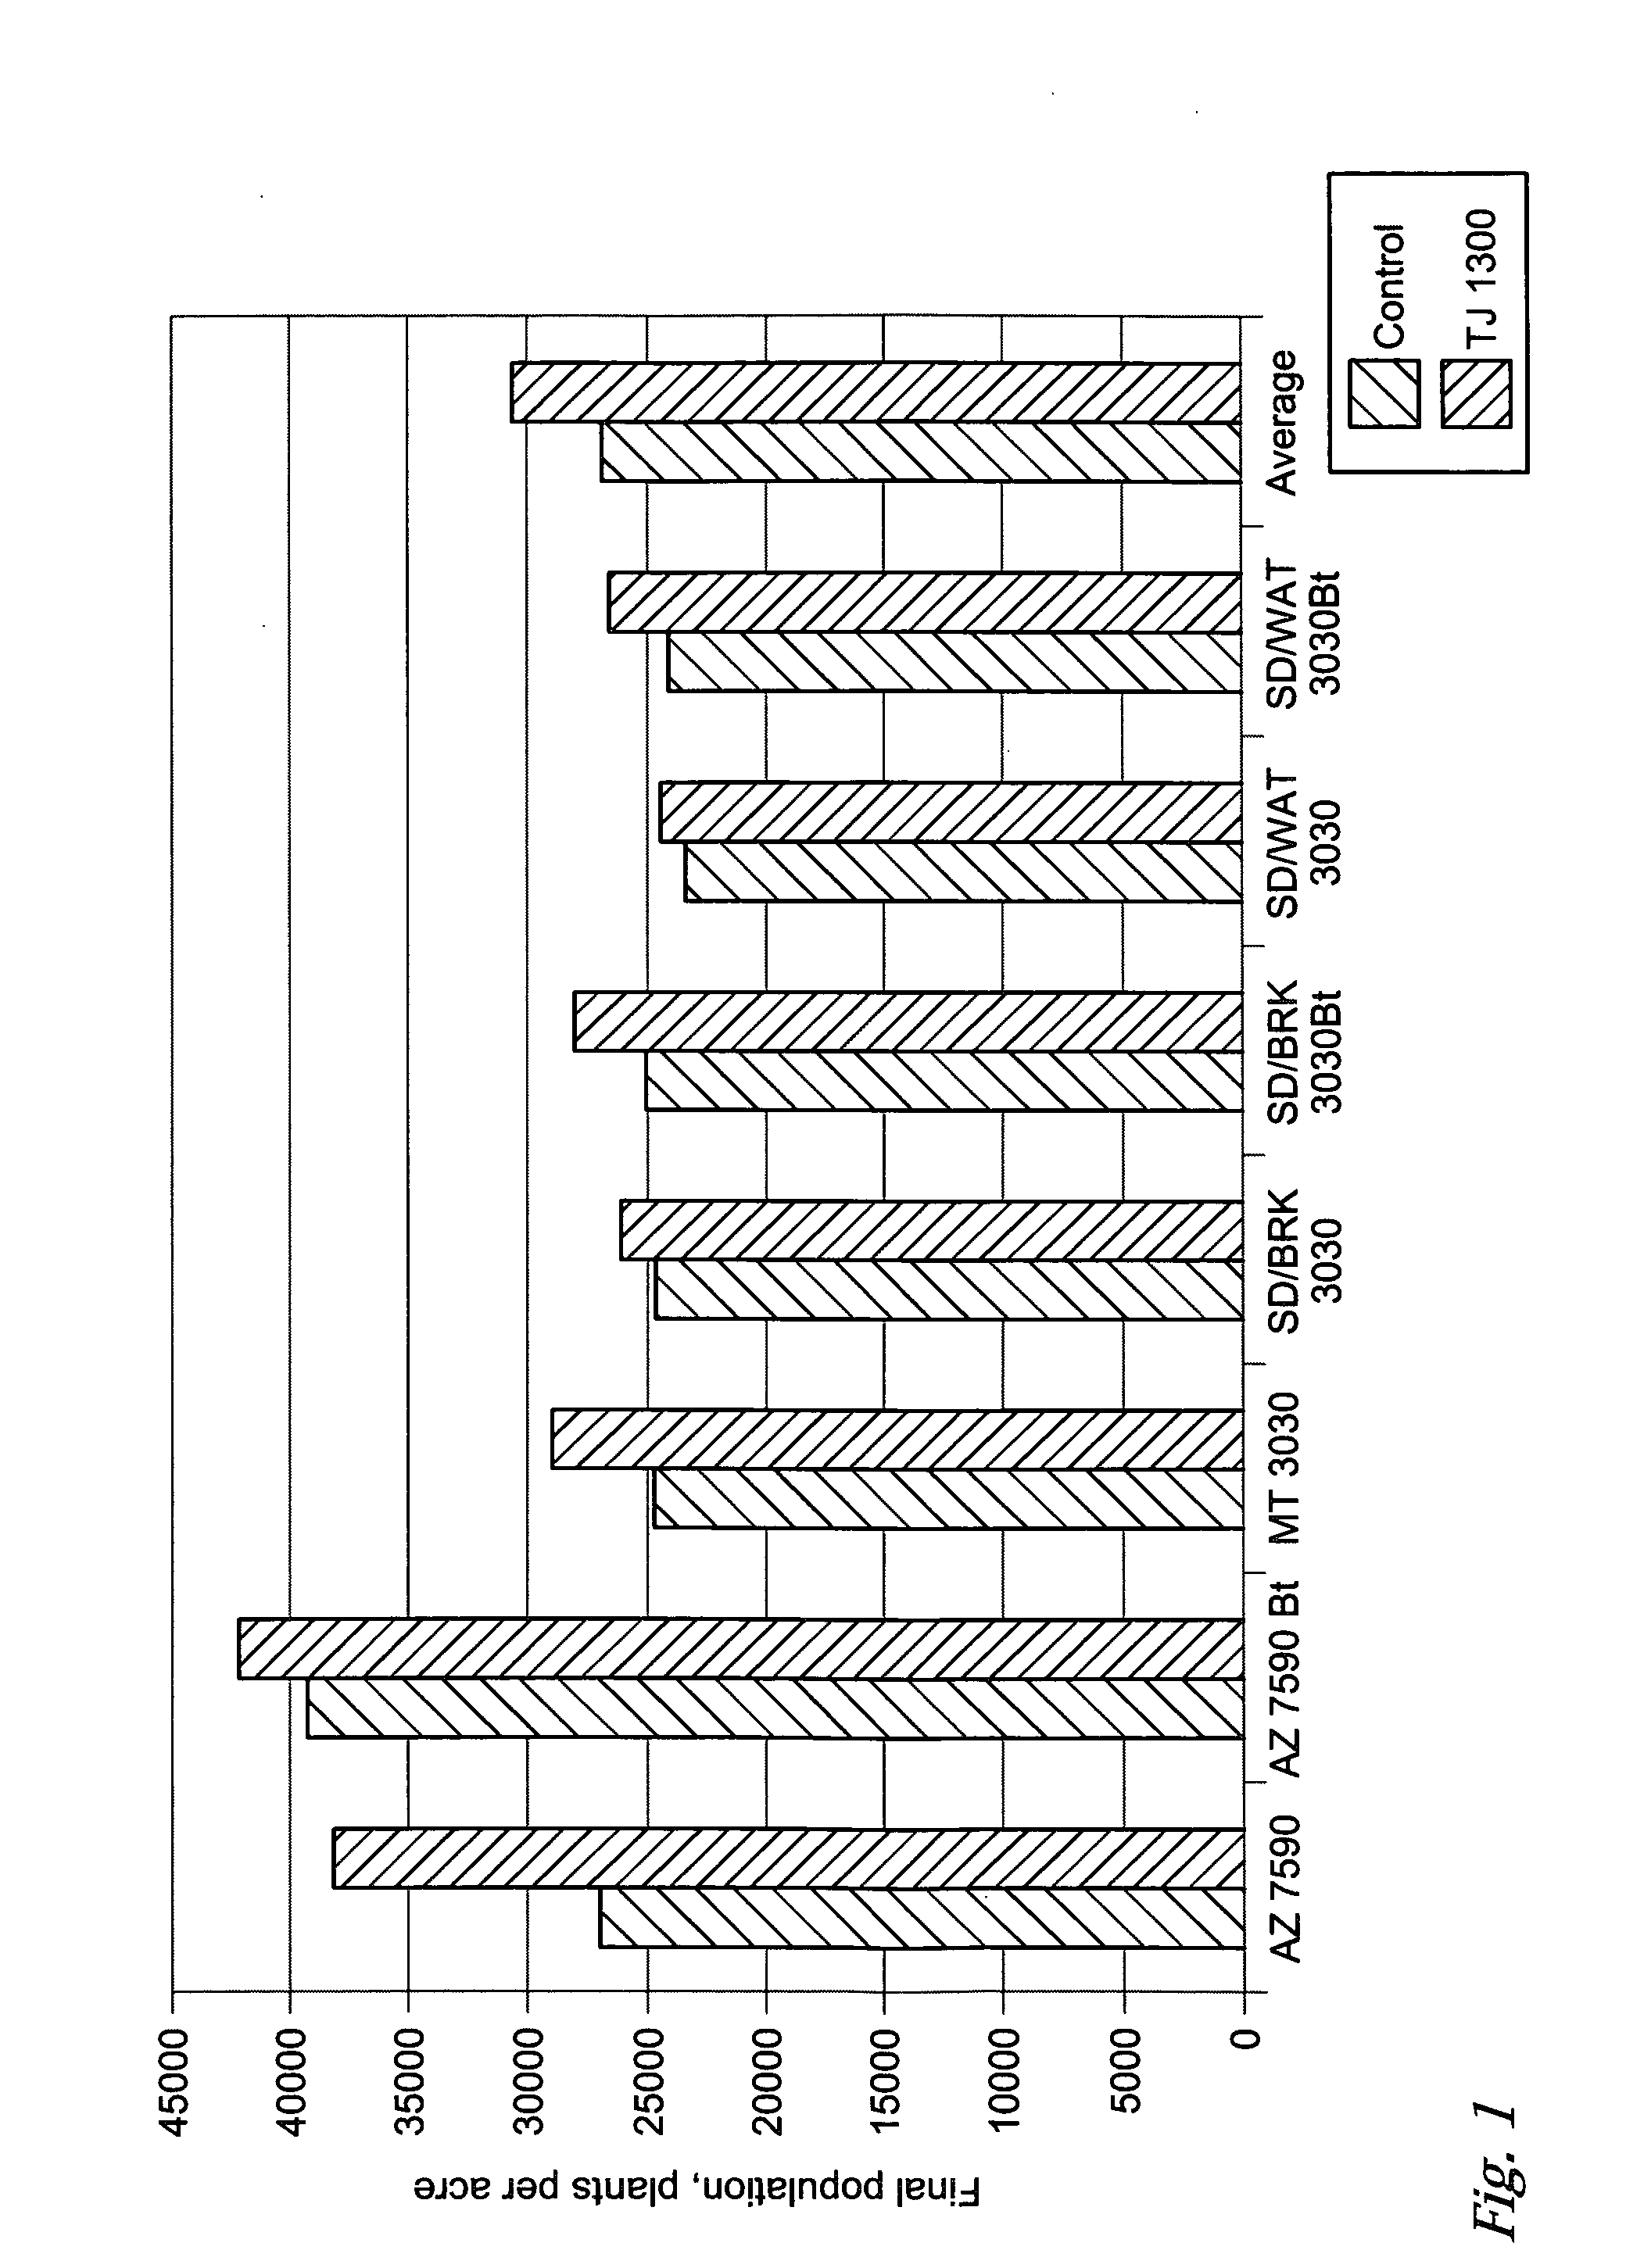 Plant seed assemblies comprising fungal/ bacterial antagonists